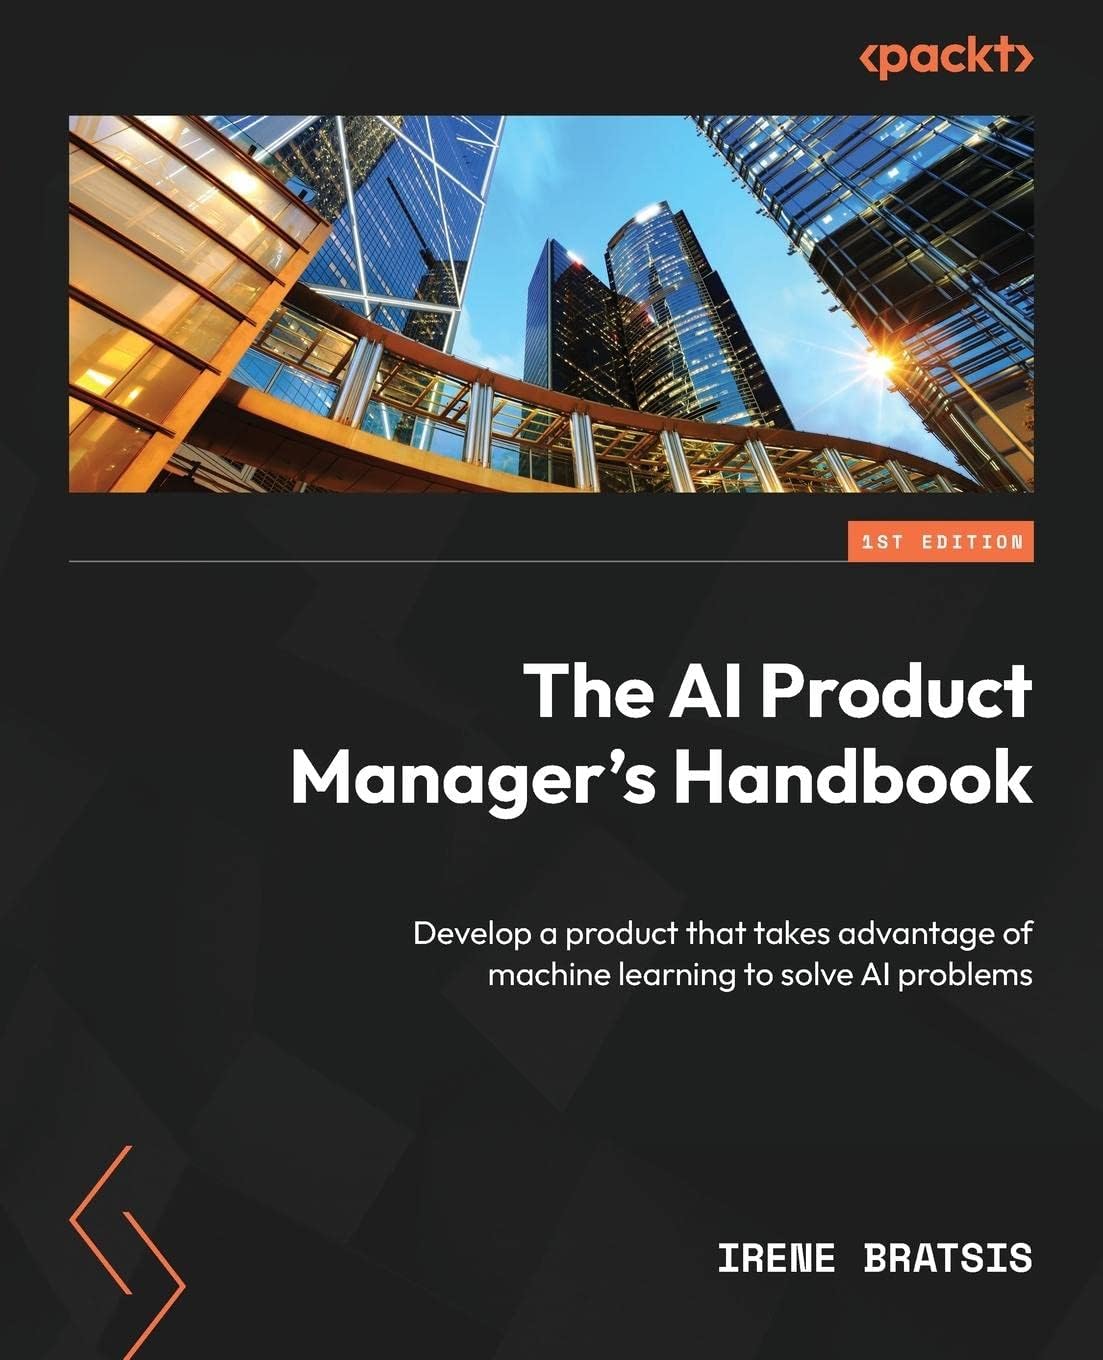 The AI Product Managers Handbook: Develop a product that takes advantage of machine learning to solve AI problems